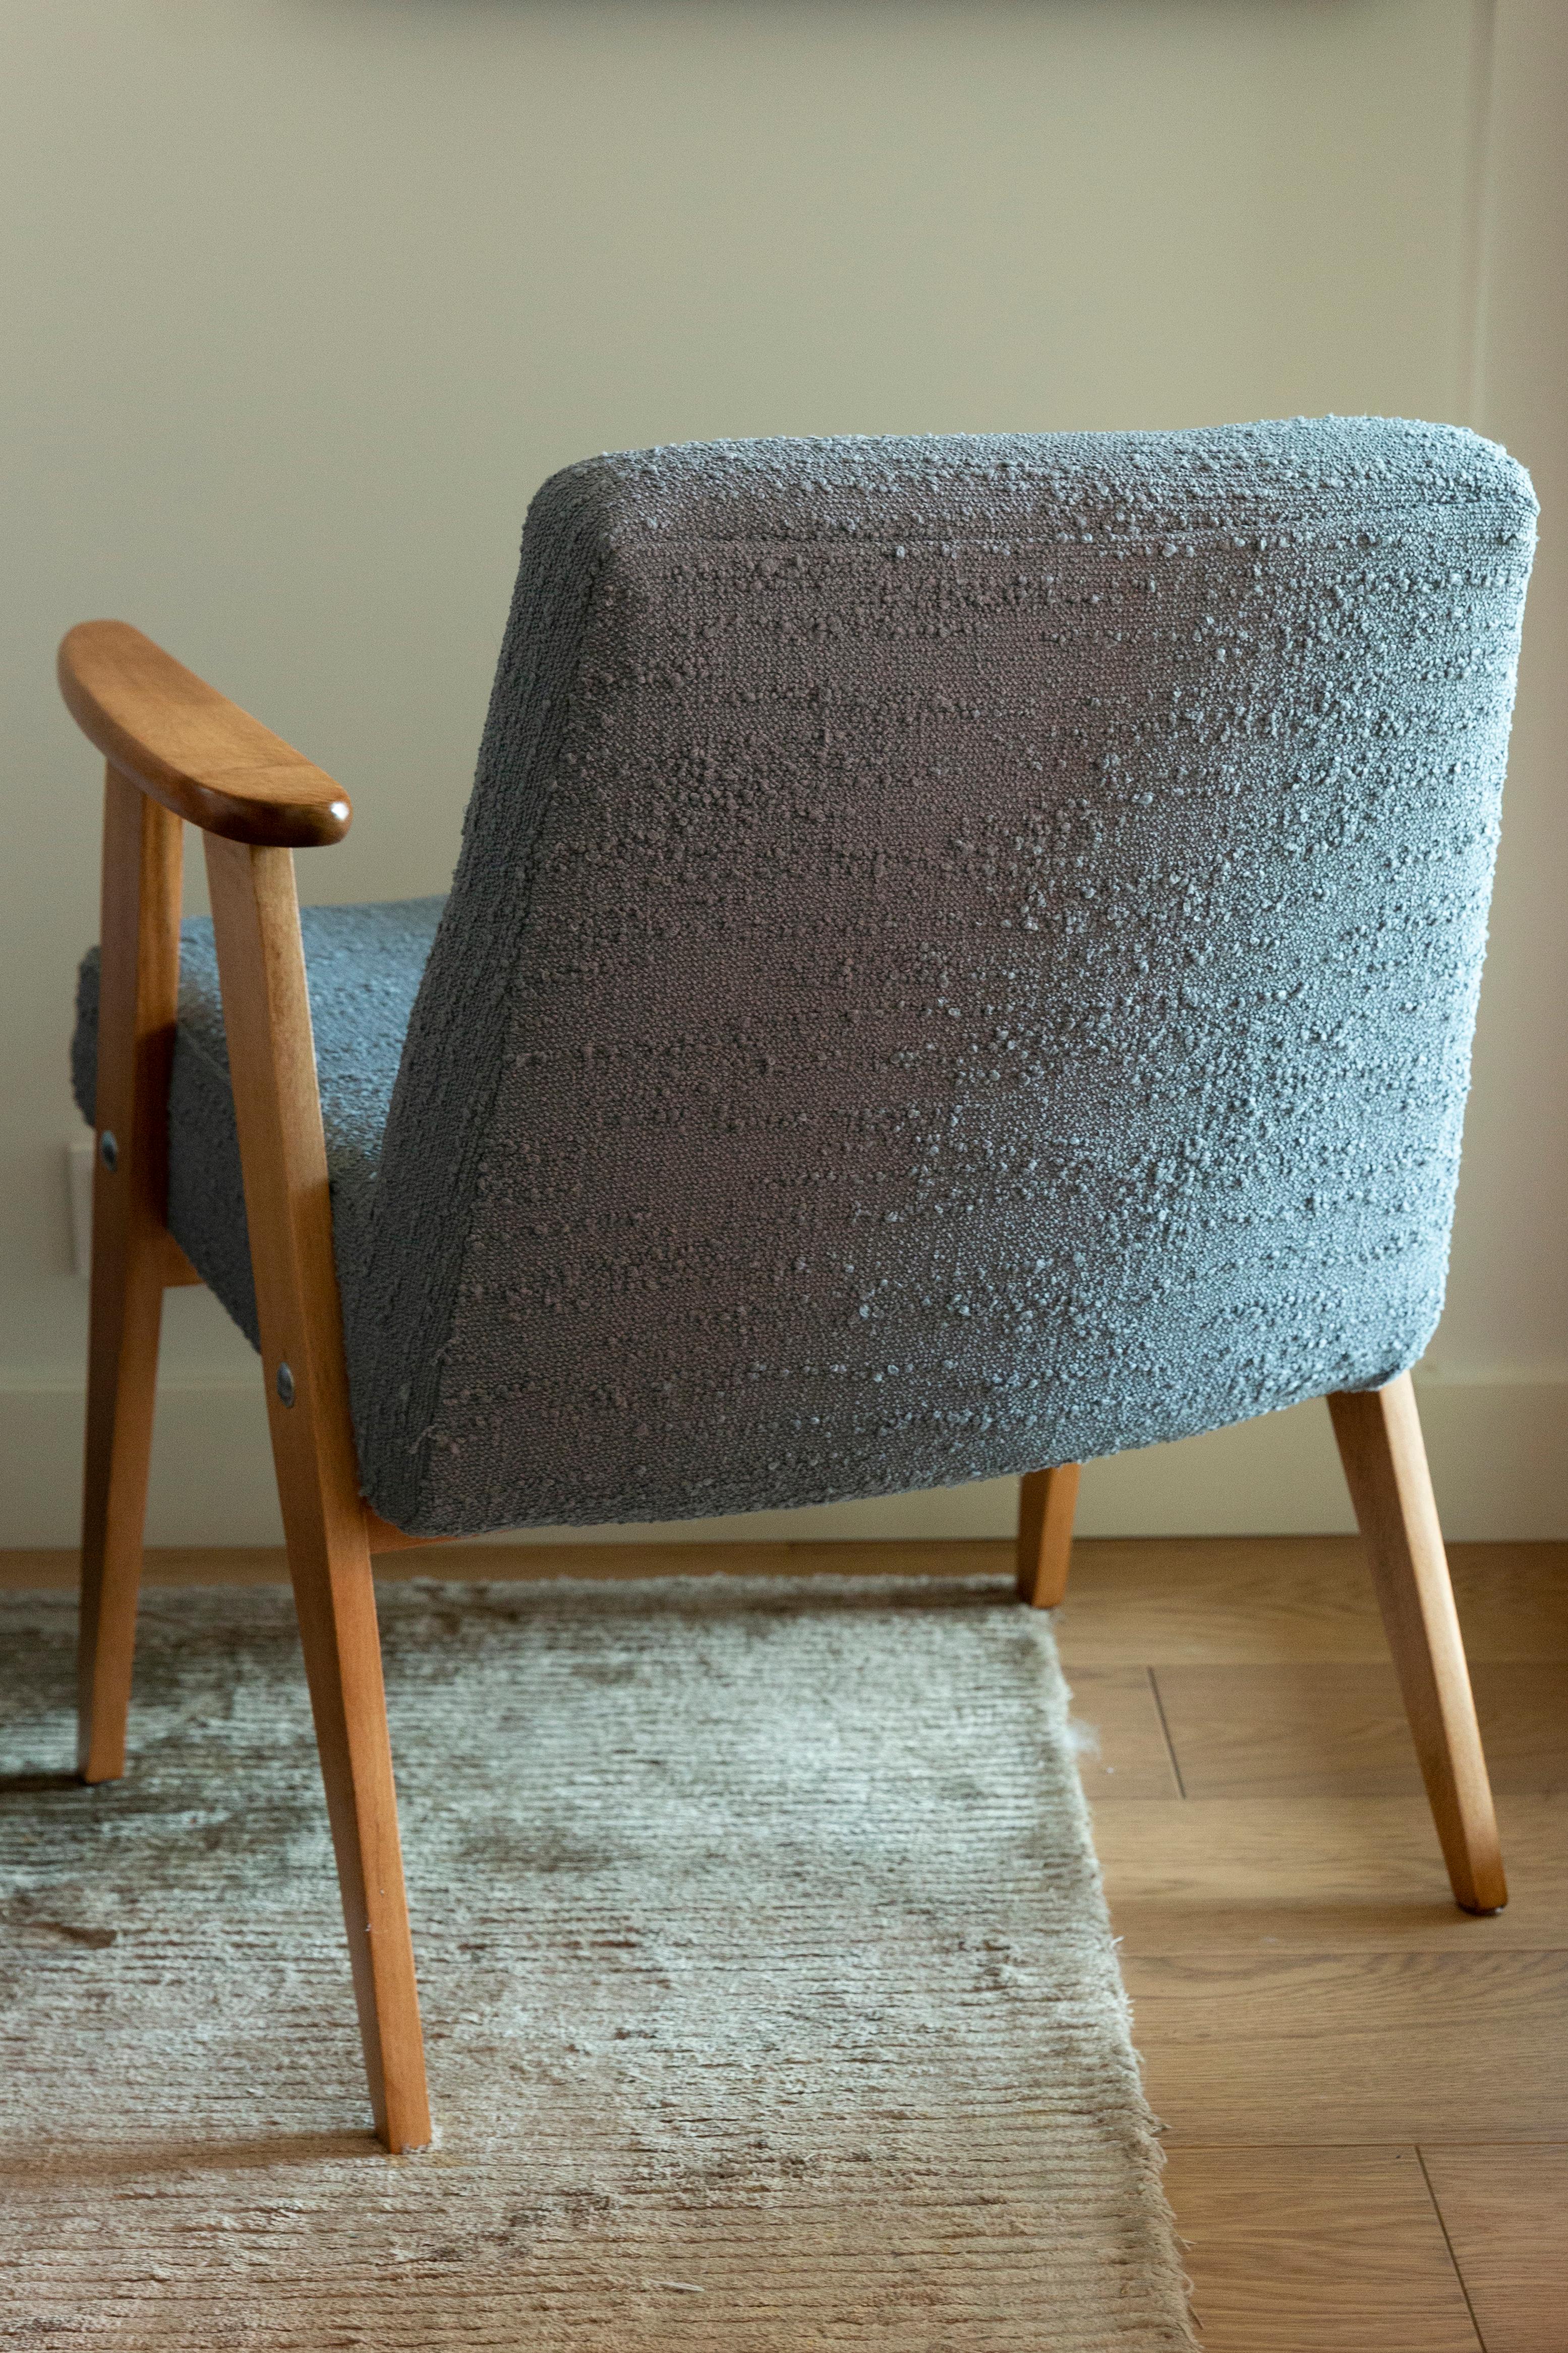 Pair of Midcentury 366 Club Armchairs in Gray Blue Boucle, Europe, 1960s For Sale 2